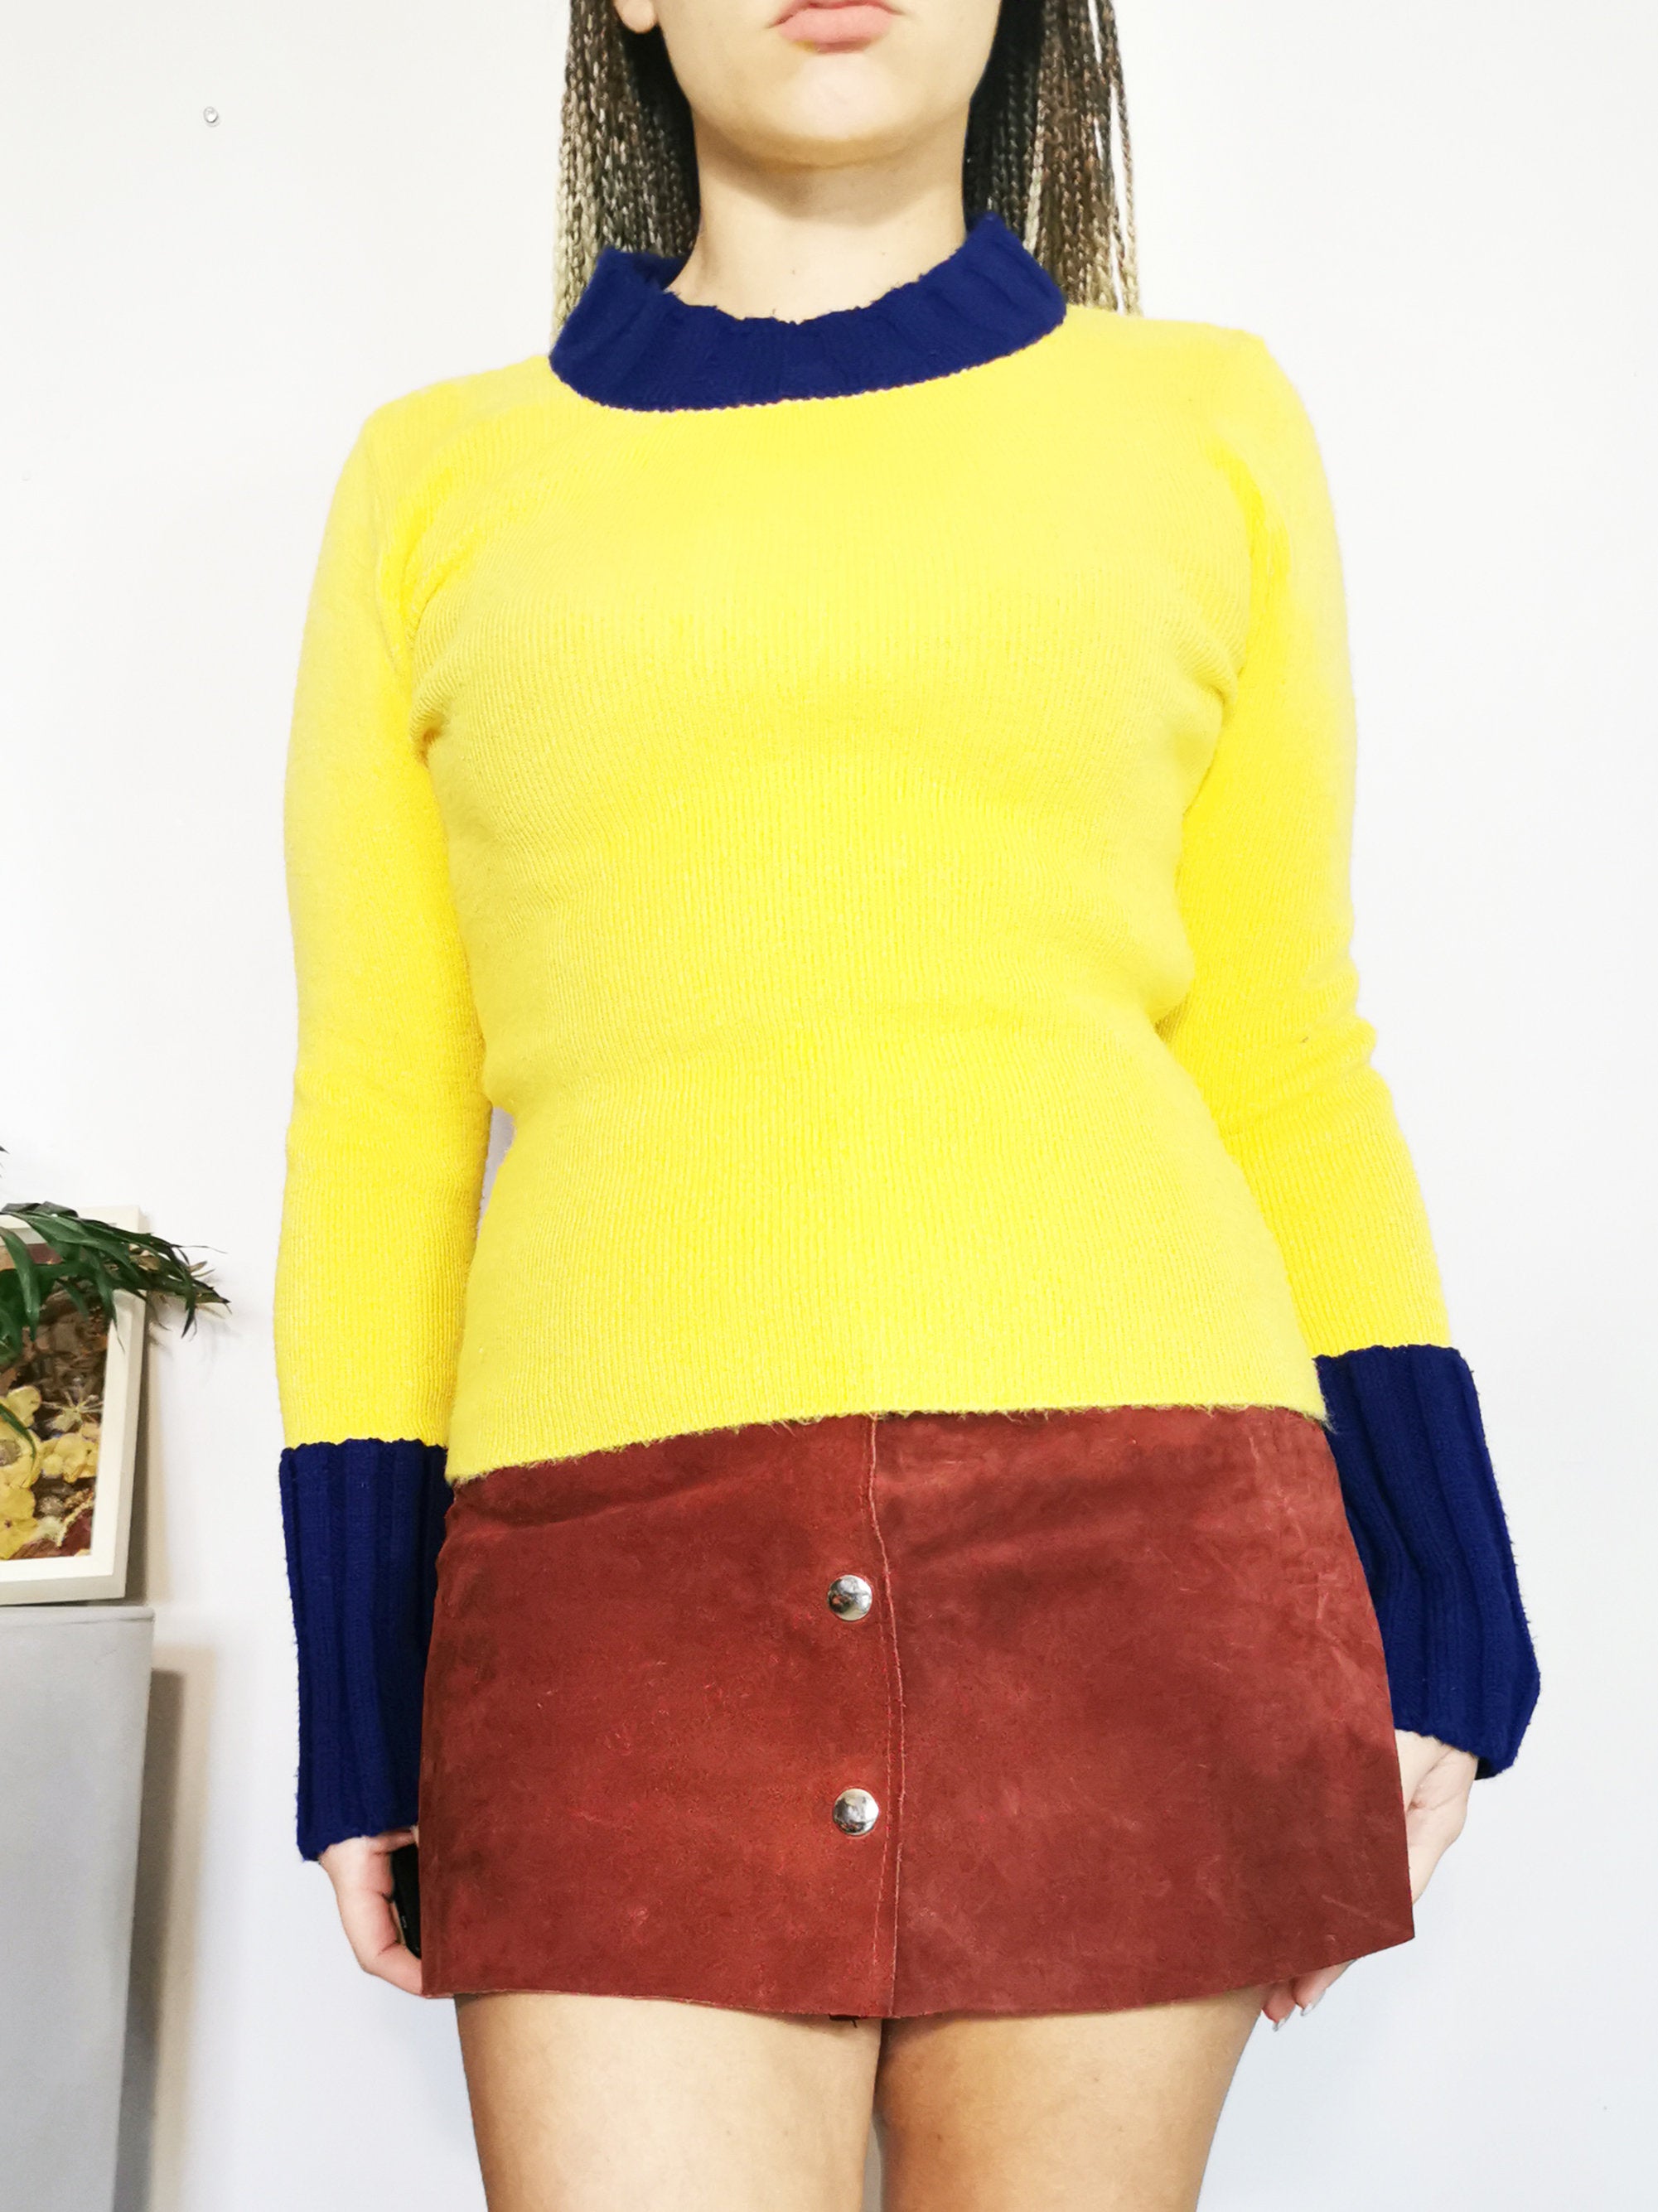 Vintage 80s minimalist color block yellow blue knitted top